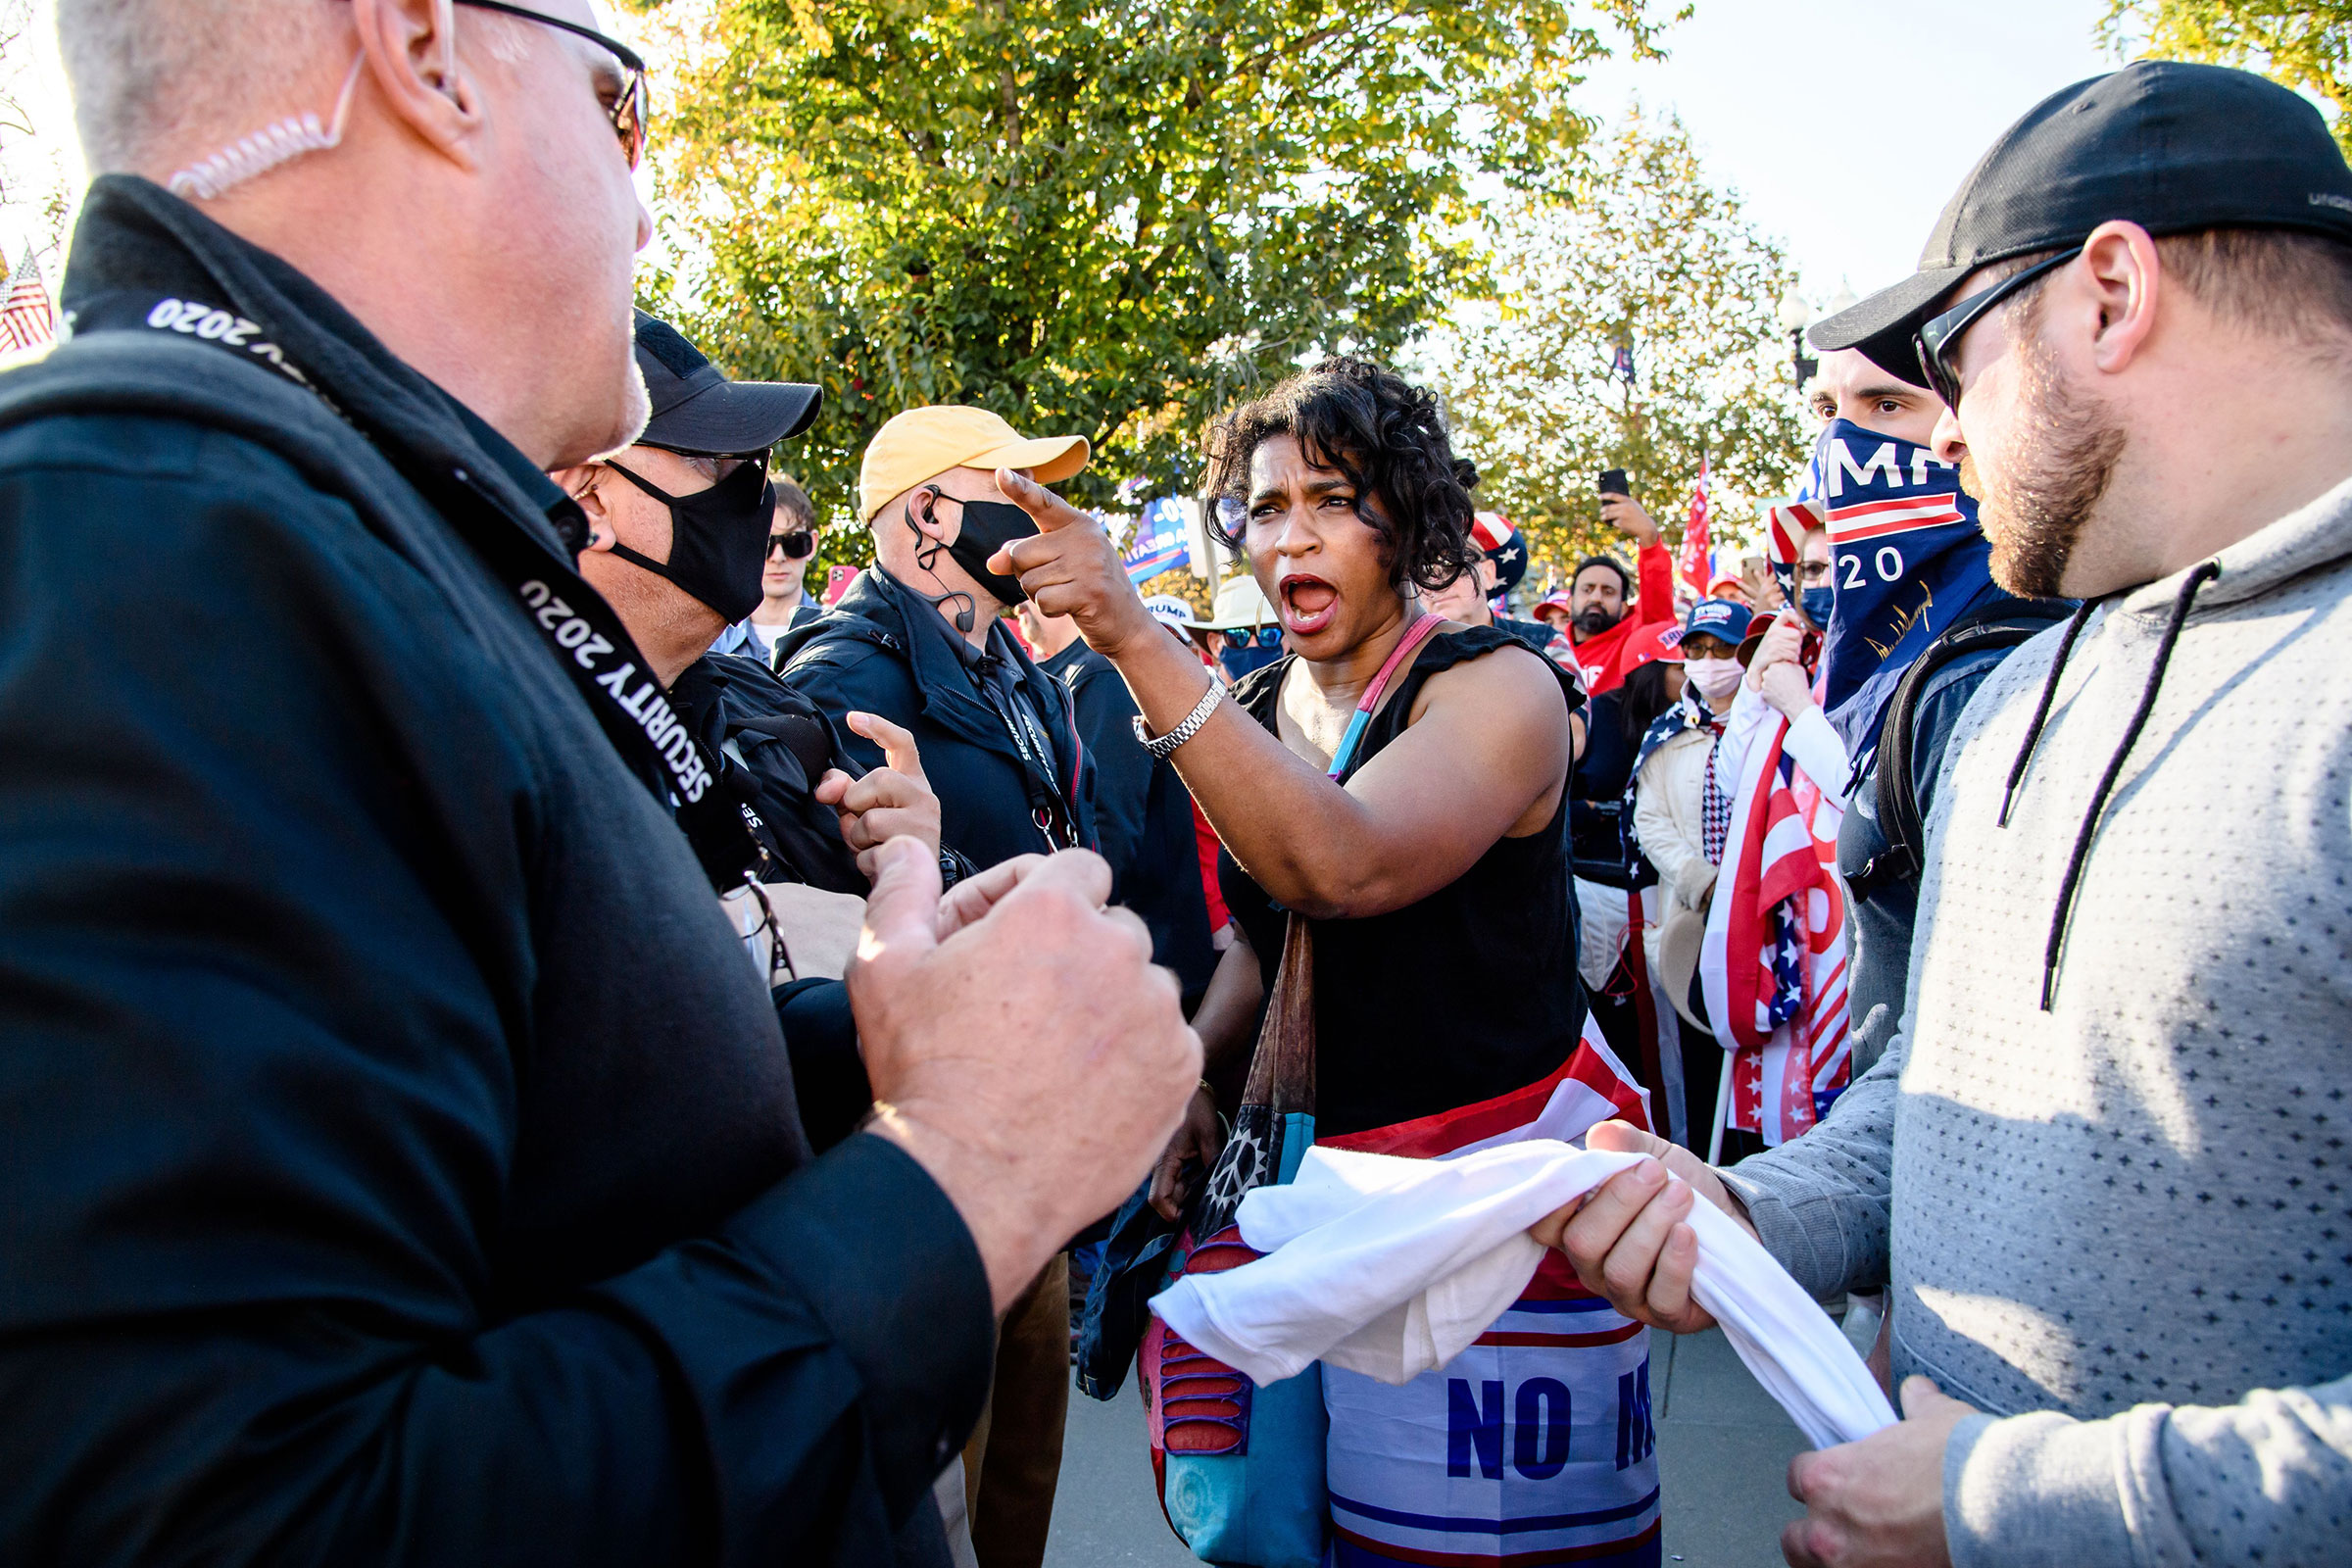 Trump supporters face off with counter­protesters near the Supreme Court, on Nov. 14 in Washington